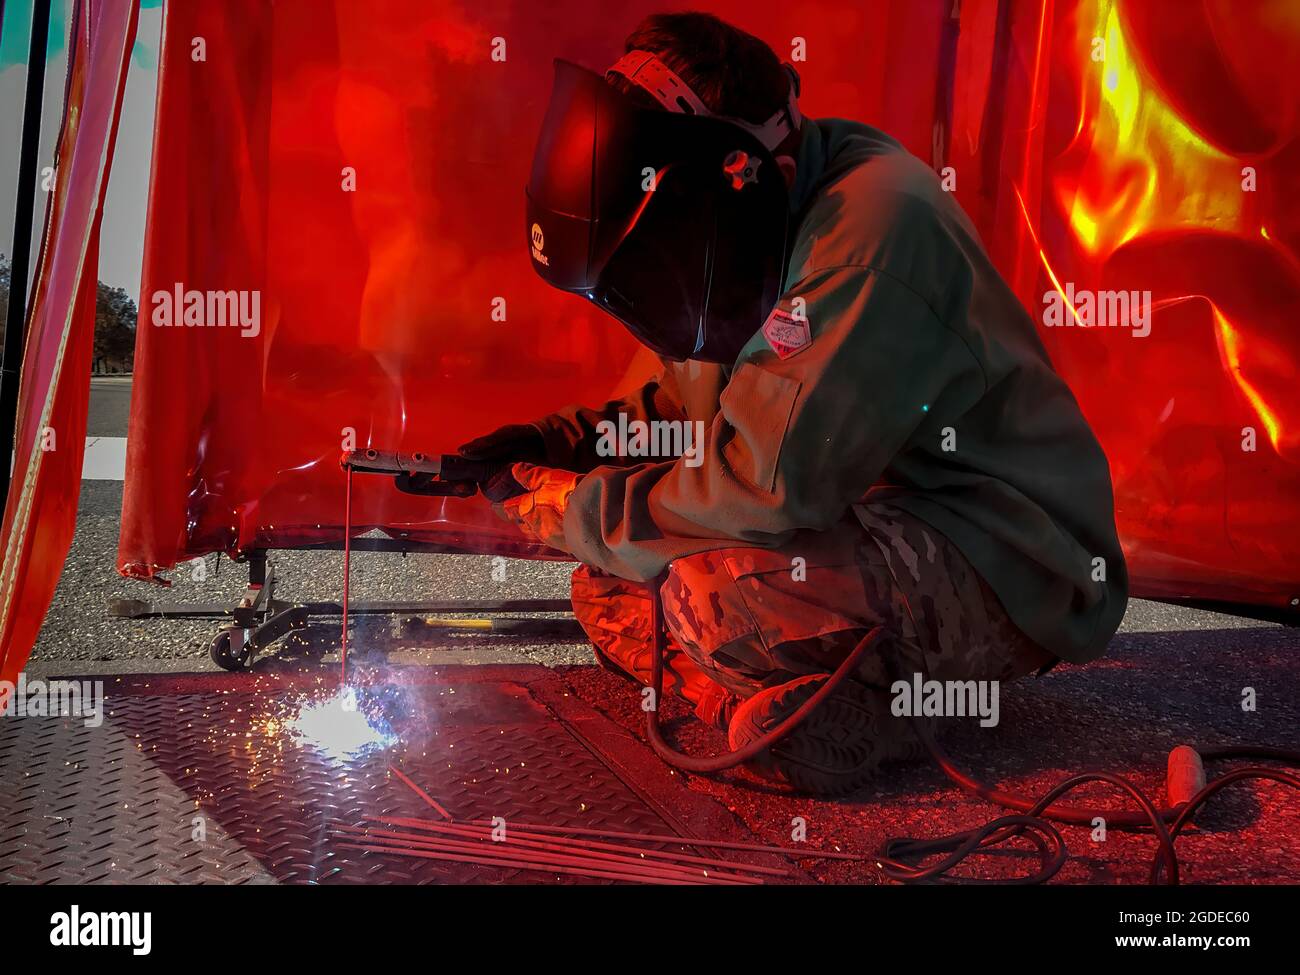 U.S. Air Force Airman 1st Class Mason Hughes, 633rd Civil Engineer Squadron structural journeyman, welds a pit plate closed at Joint Base Langley-Eustis, Va., Dec. 4, 2019. Pit plates are covers that protect water valves around the installation and are welded down for safety. (U.S. Air Force photo by Tech. Sgt. Carlin Leslie) Stock Photo